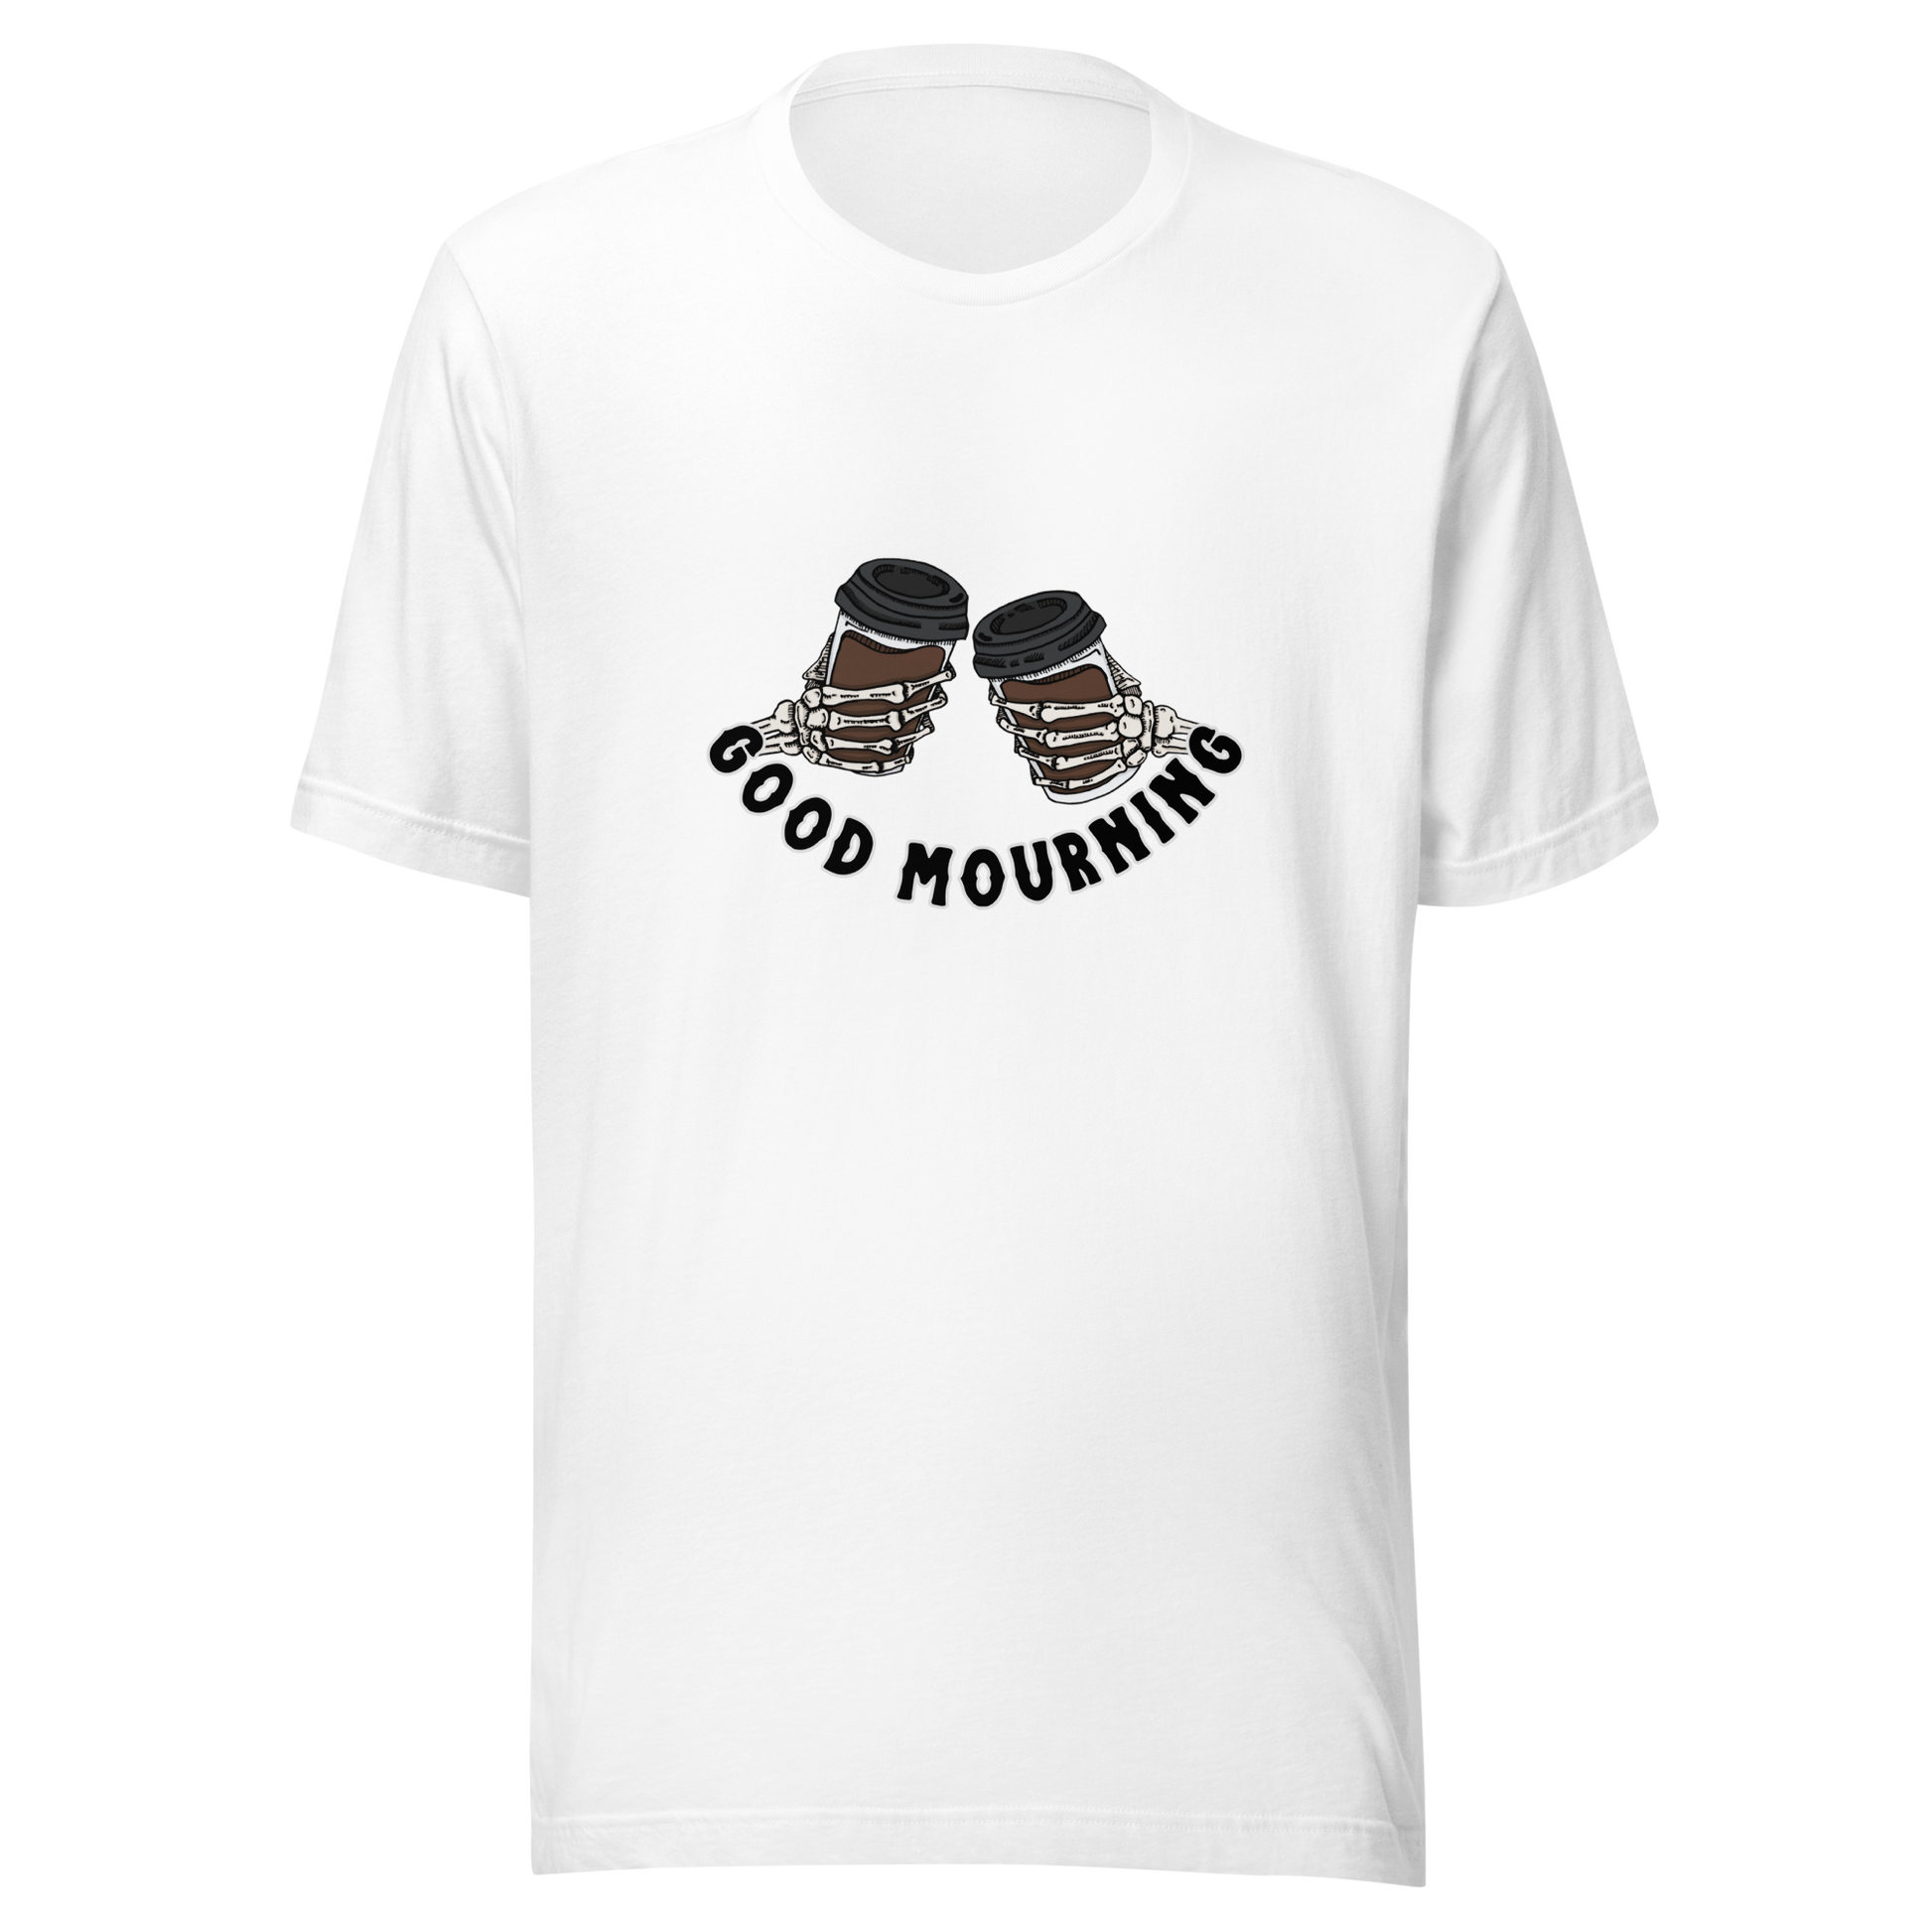 good mourning t-shirt in white - gaslit apparel